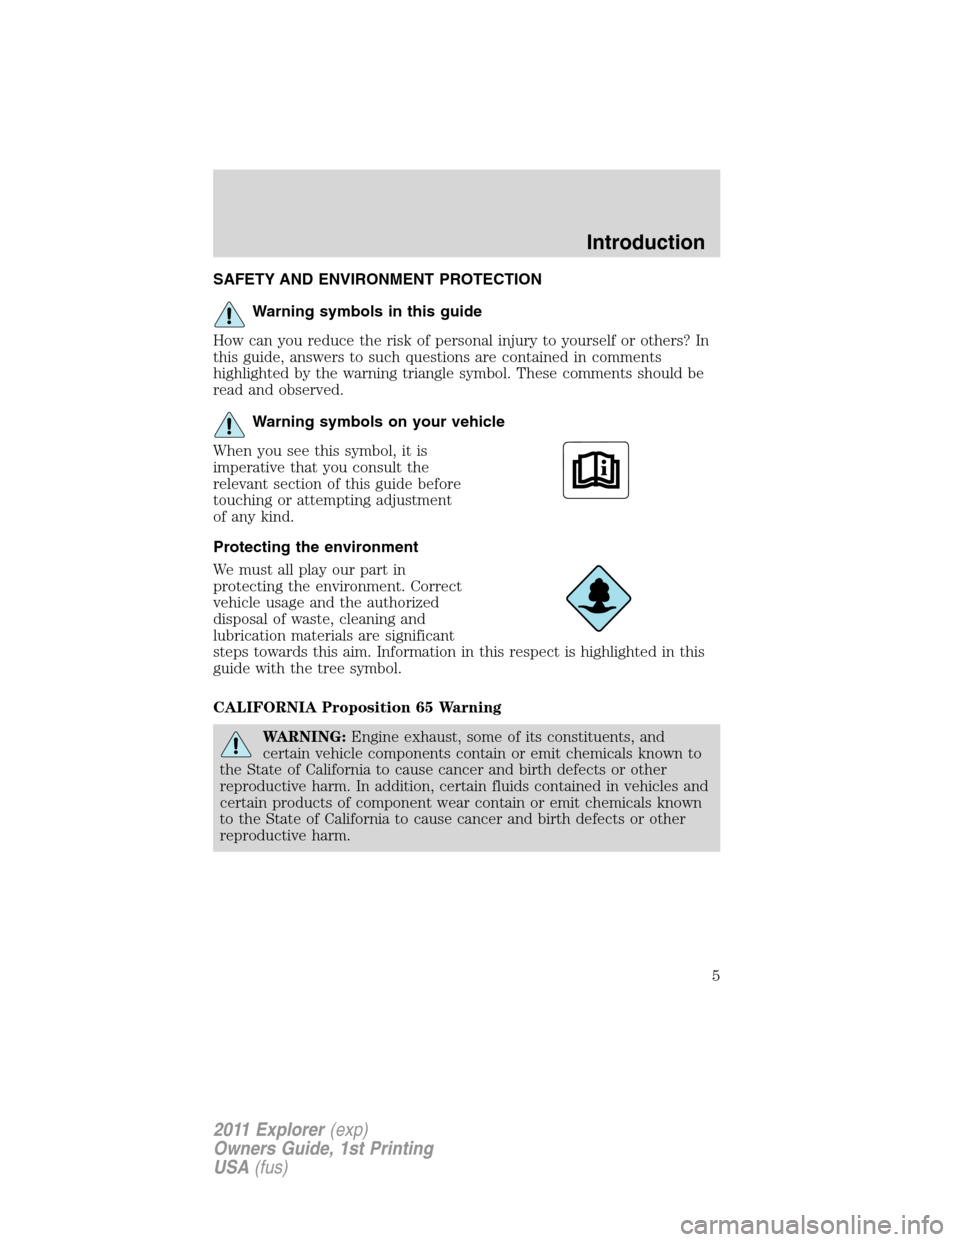 FORD EXPLORER 2011 5.G Owners Manual SAFETY AND ENVIRONMENT PROTECTION
Warning symbols in this guide
How can you reduce the risk of personal injury to yourself or others? In
this guide, answers to such questions are contained in comments